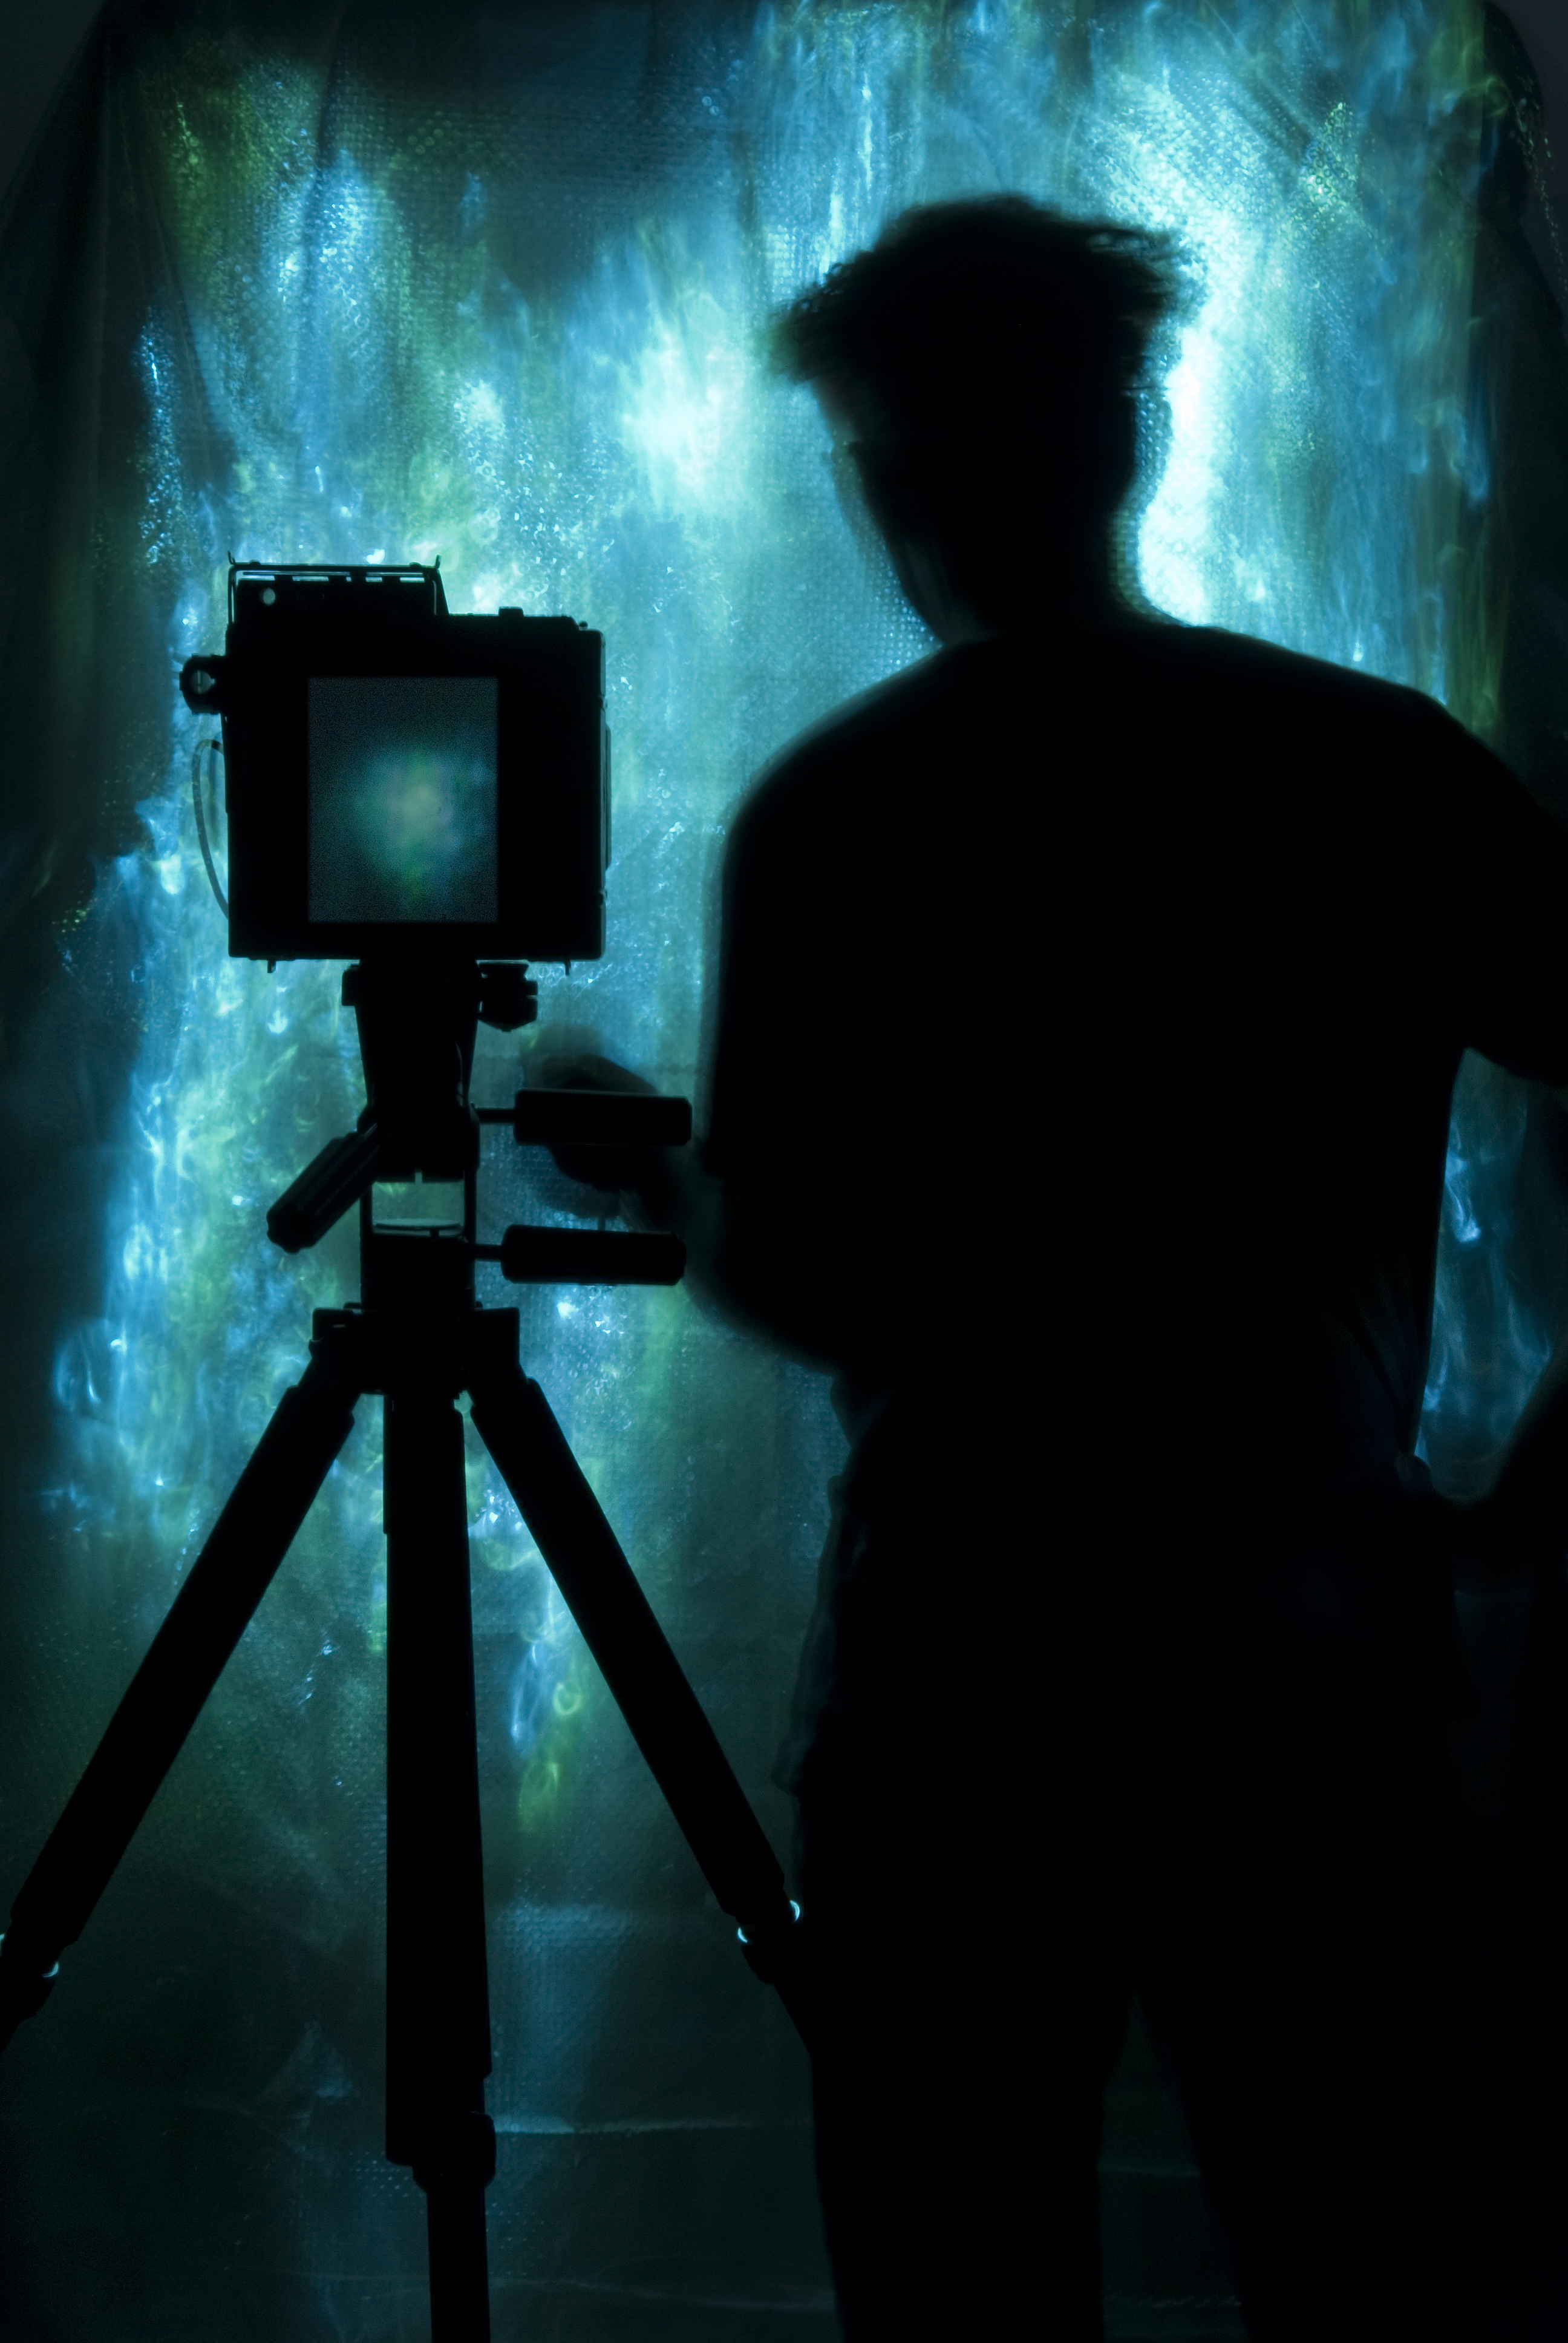 silhouette of a man with a camera on tripod